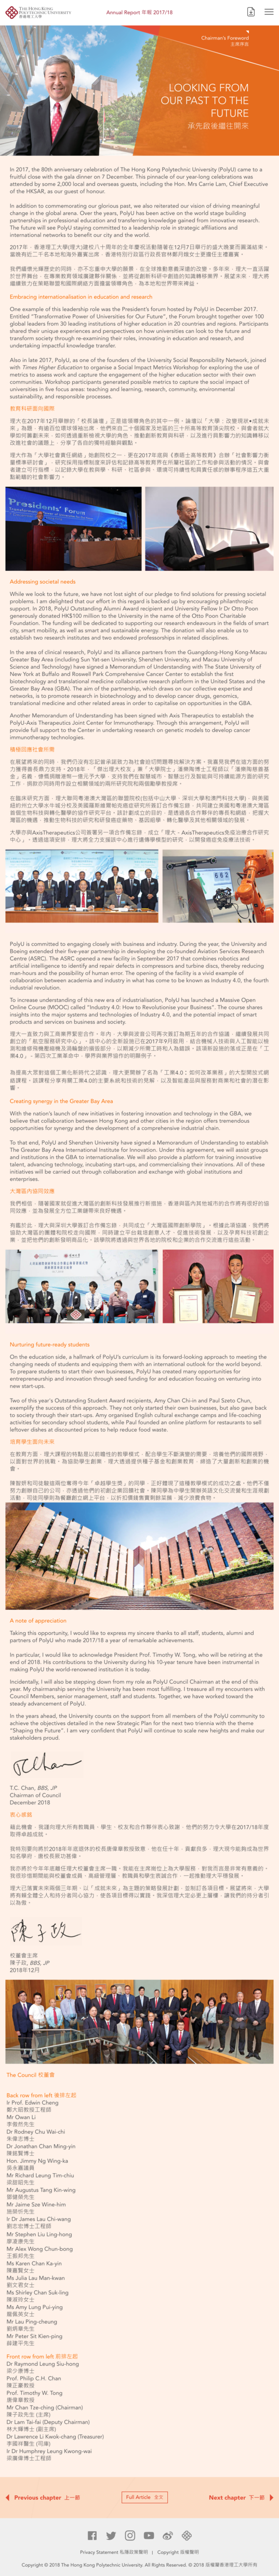 Tablet PolyU Annual Report 2017/18 Chairman's Foreword